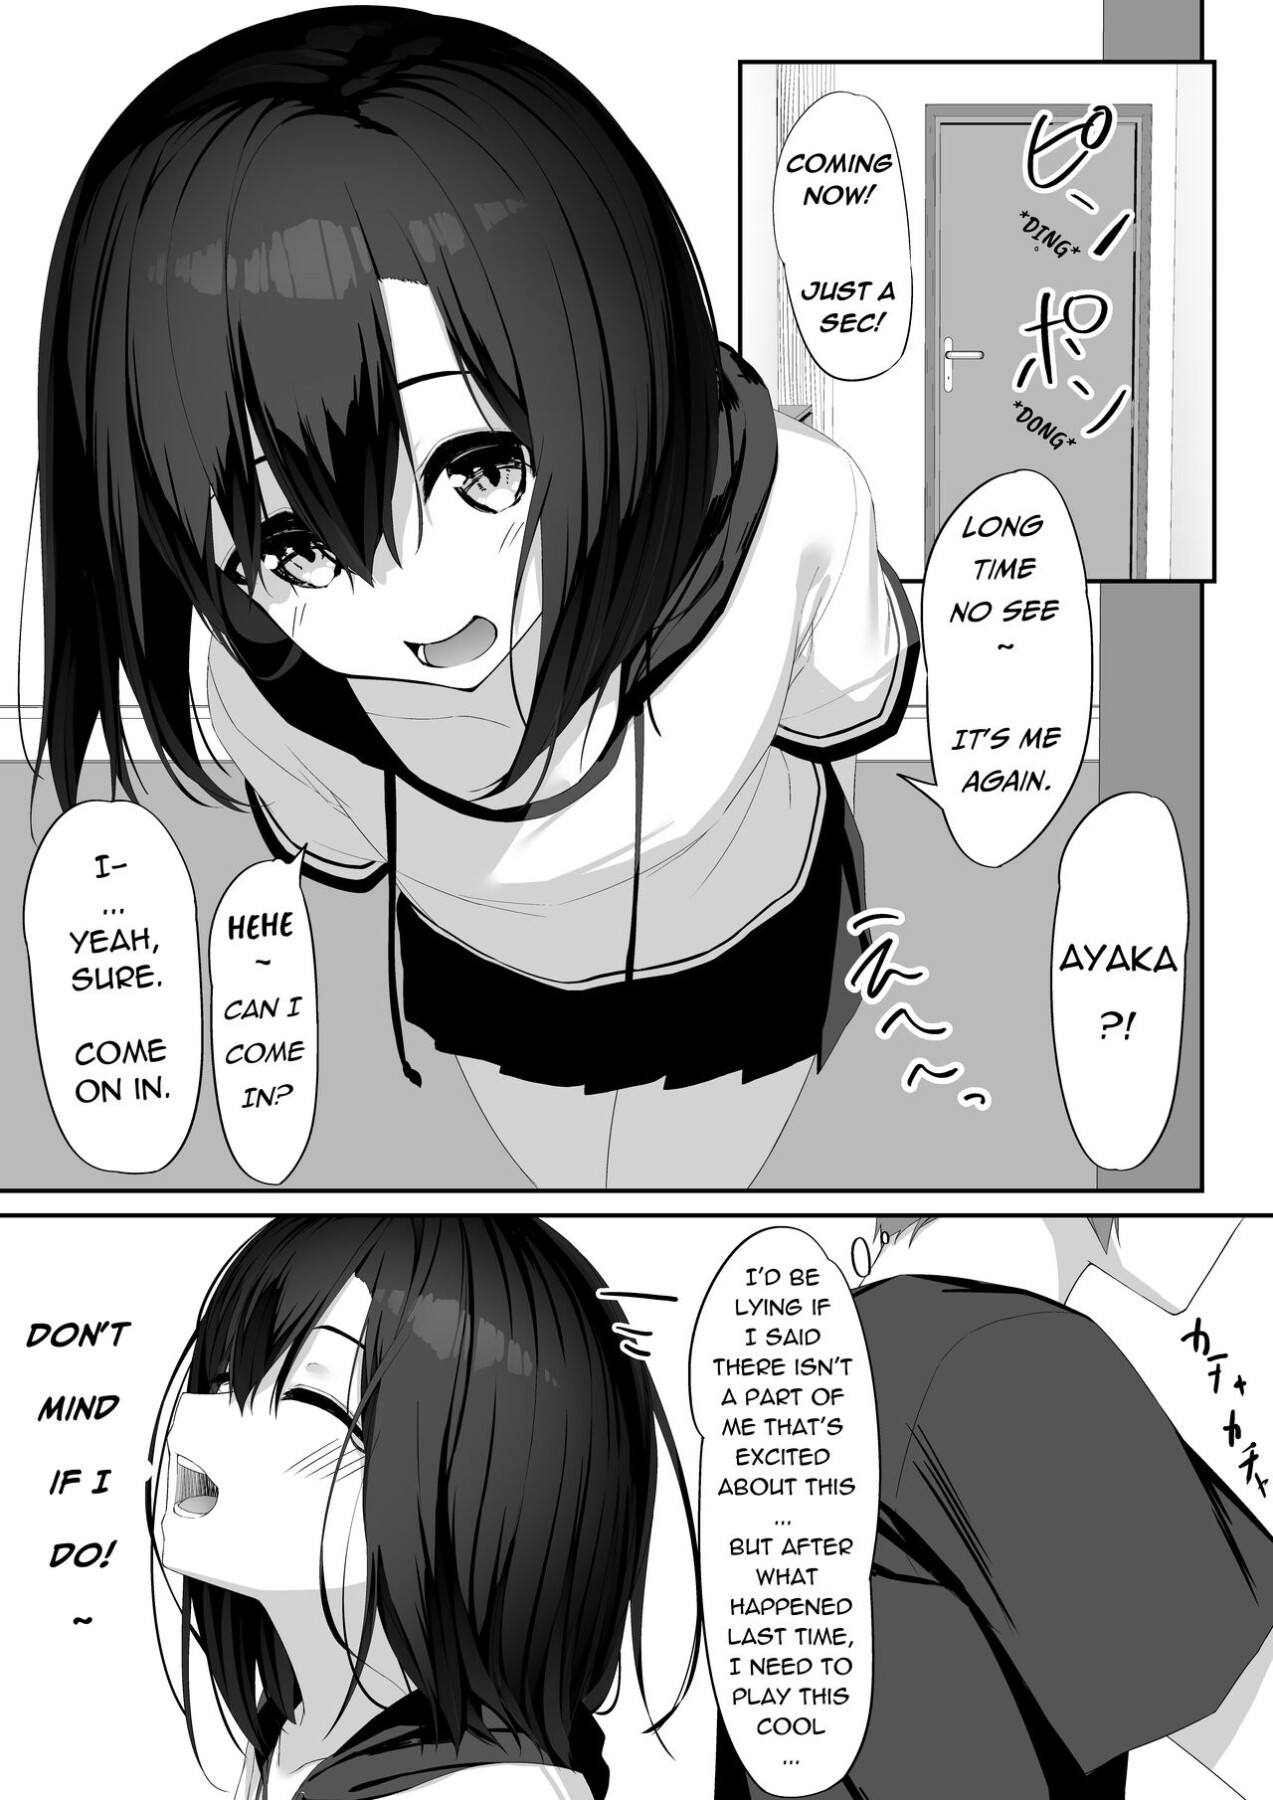 Hentai Manga Comic-Having Orgasm-Filled Sex With A Pervy Girl-Read-2